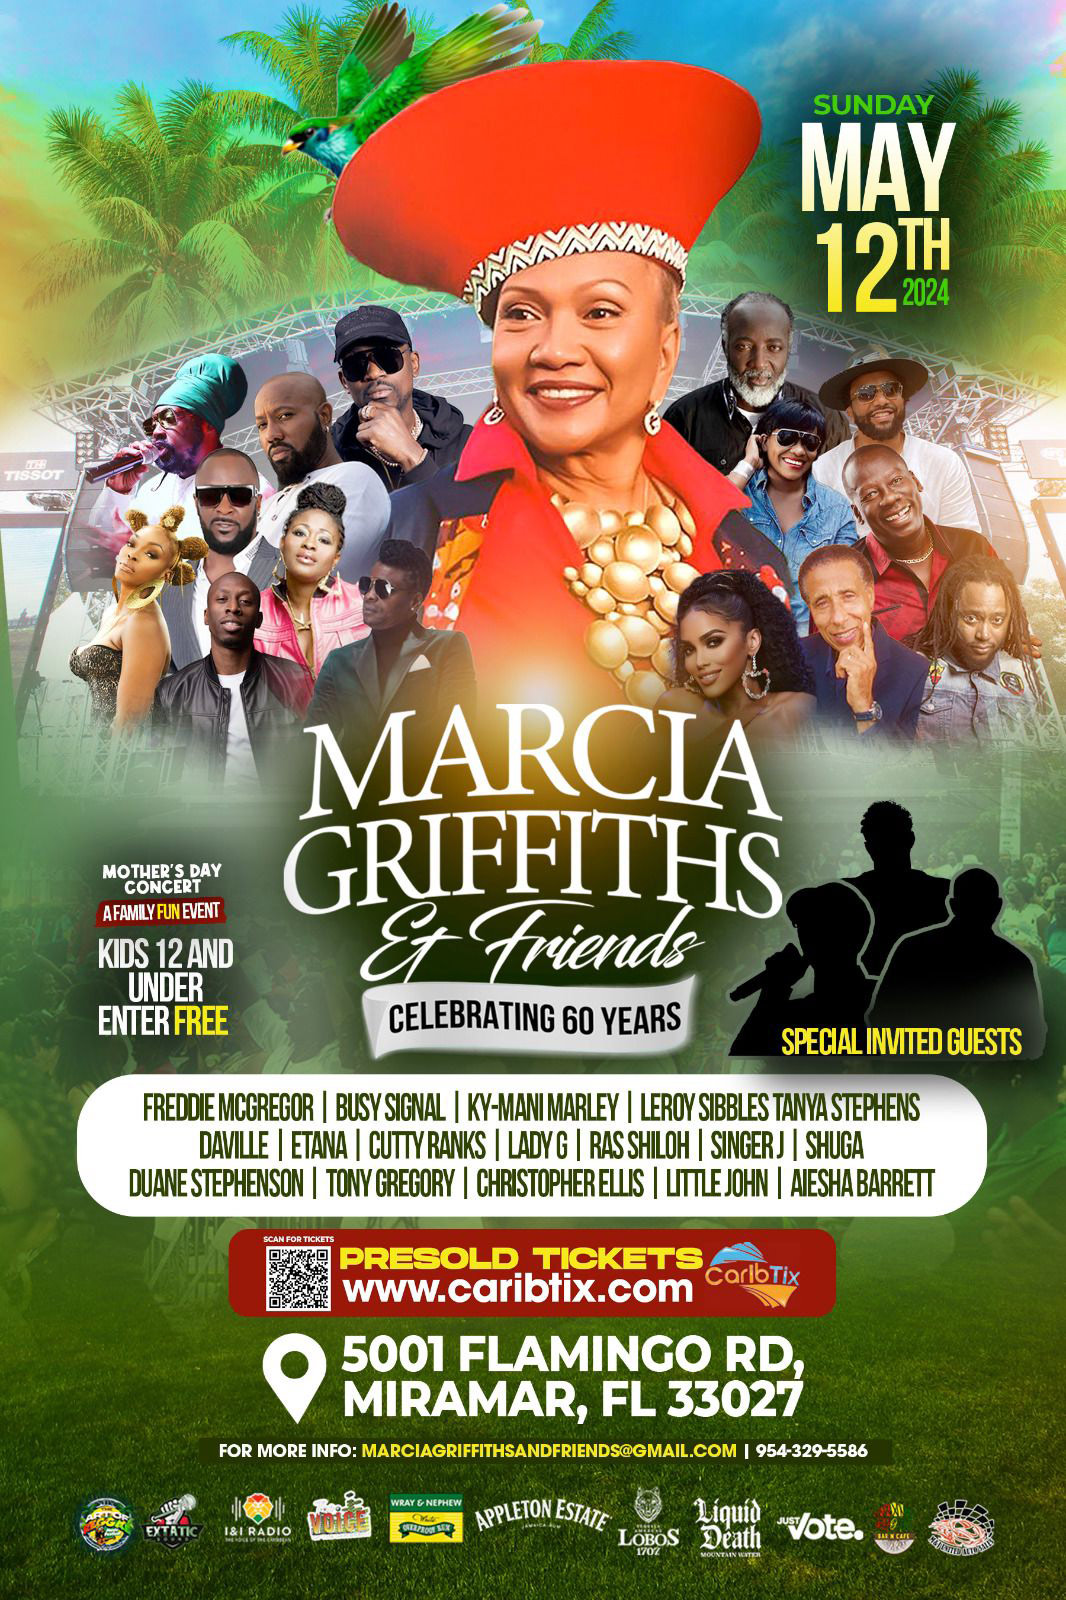 Marcia Griffiths & Friends - Celebrating 60 Years 2024